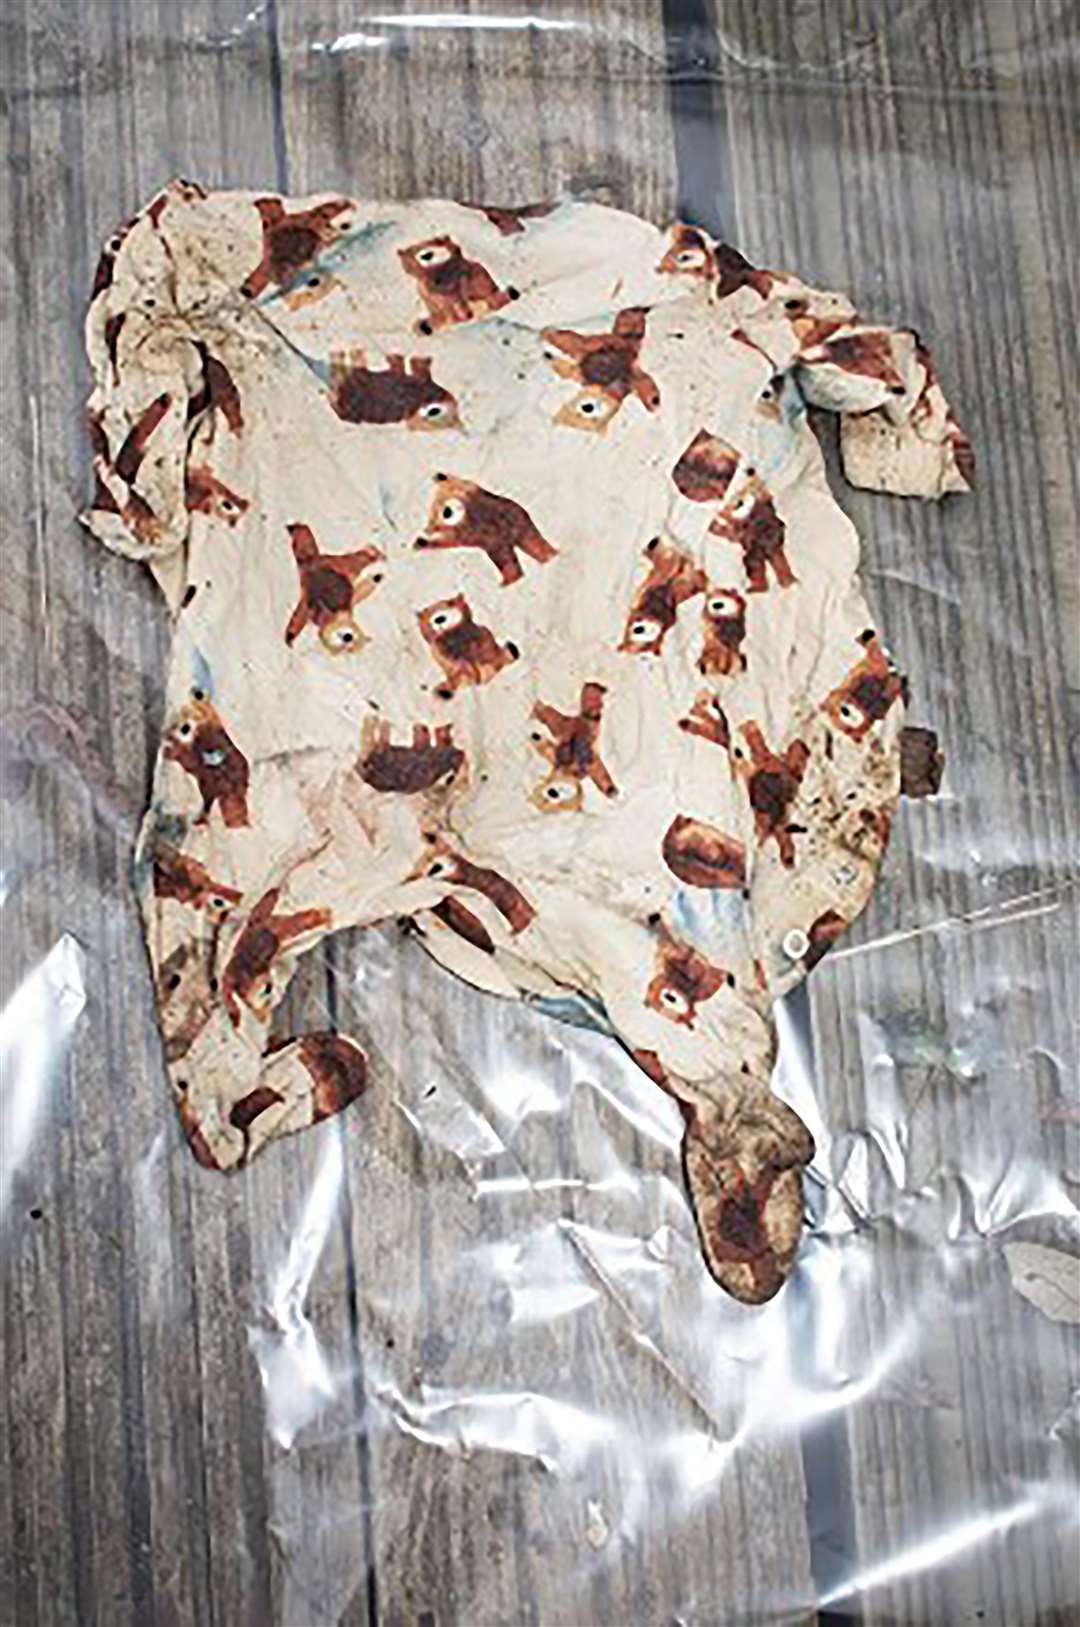 A babygrow found in a Lidl bag in a shed in Lower Roedale Allotments (Met Police/PA)